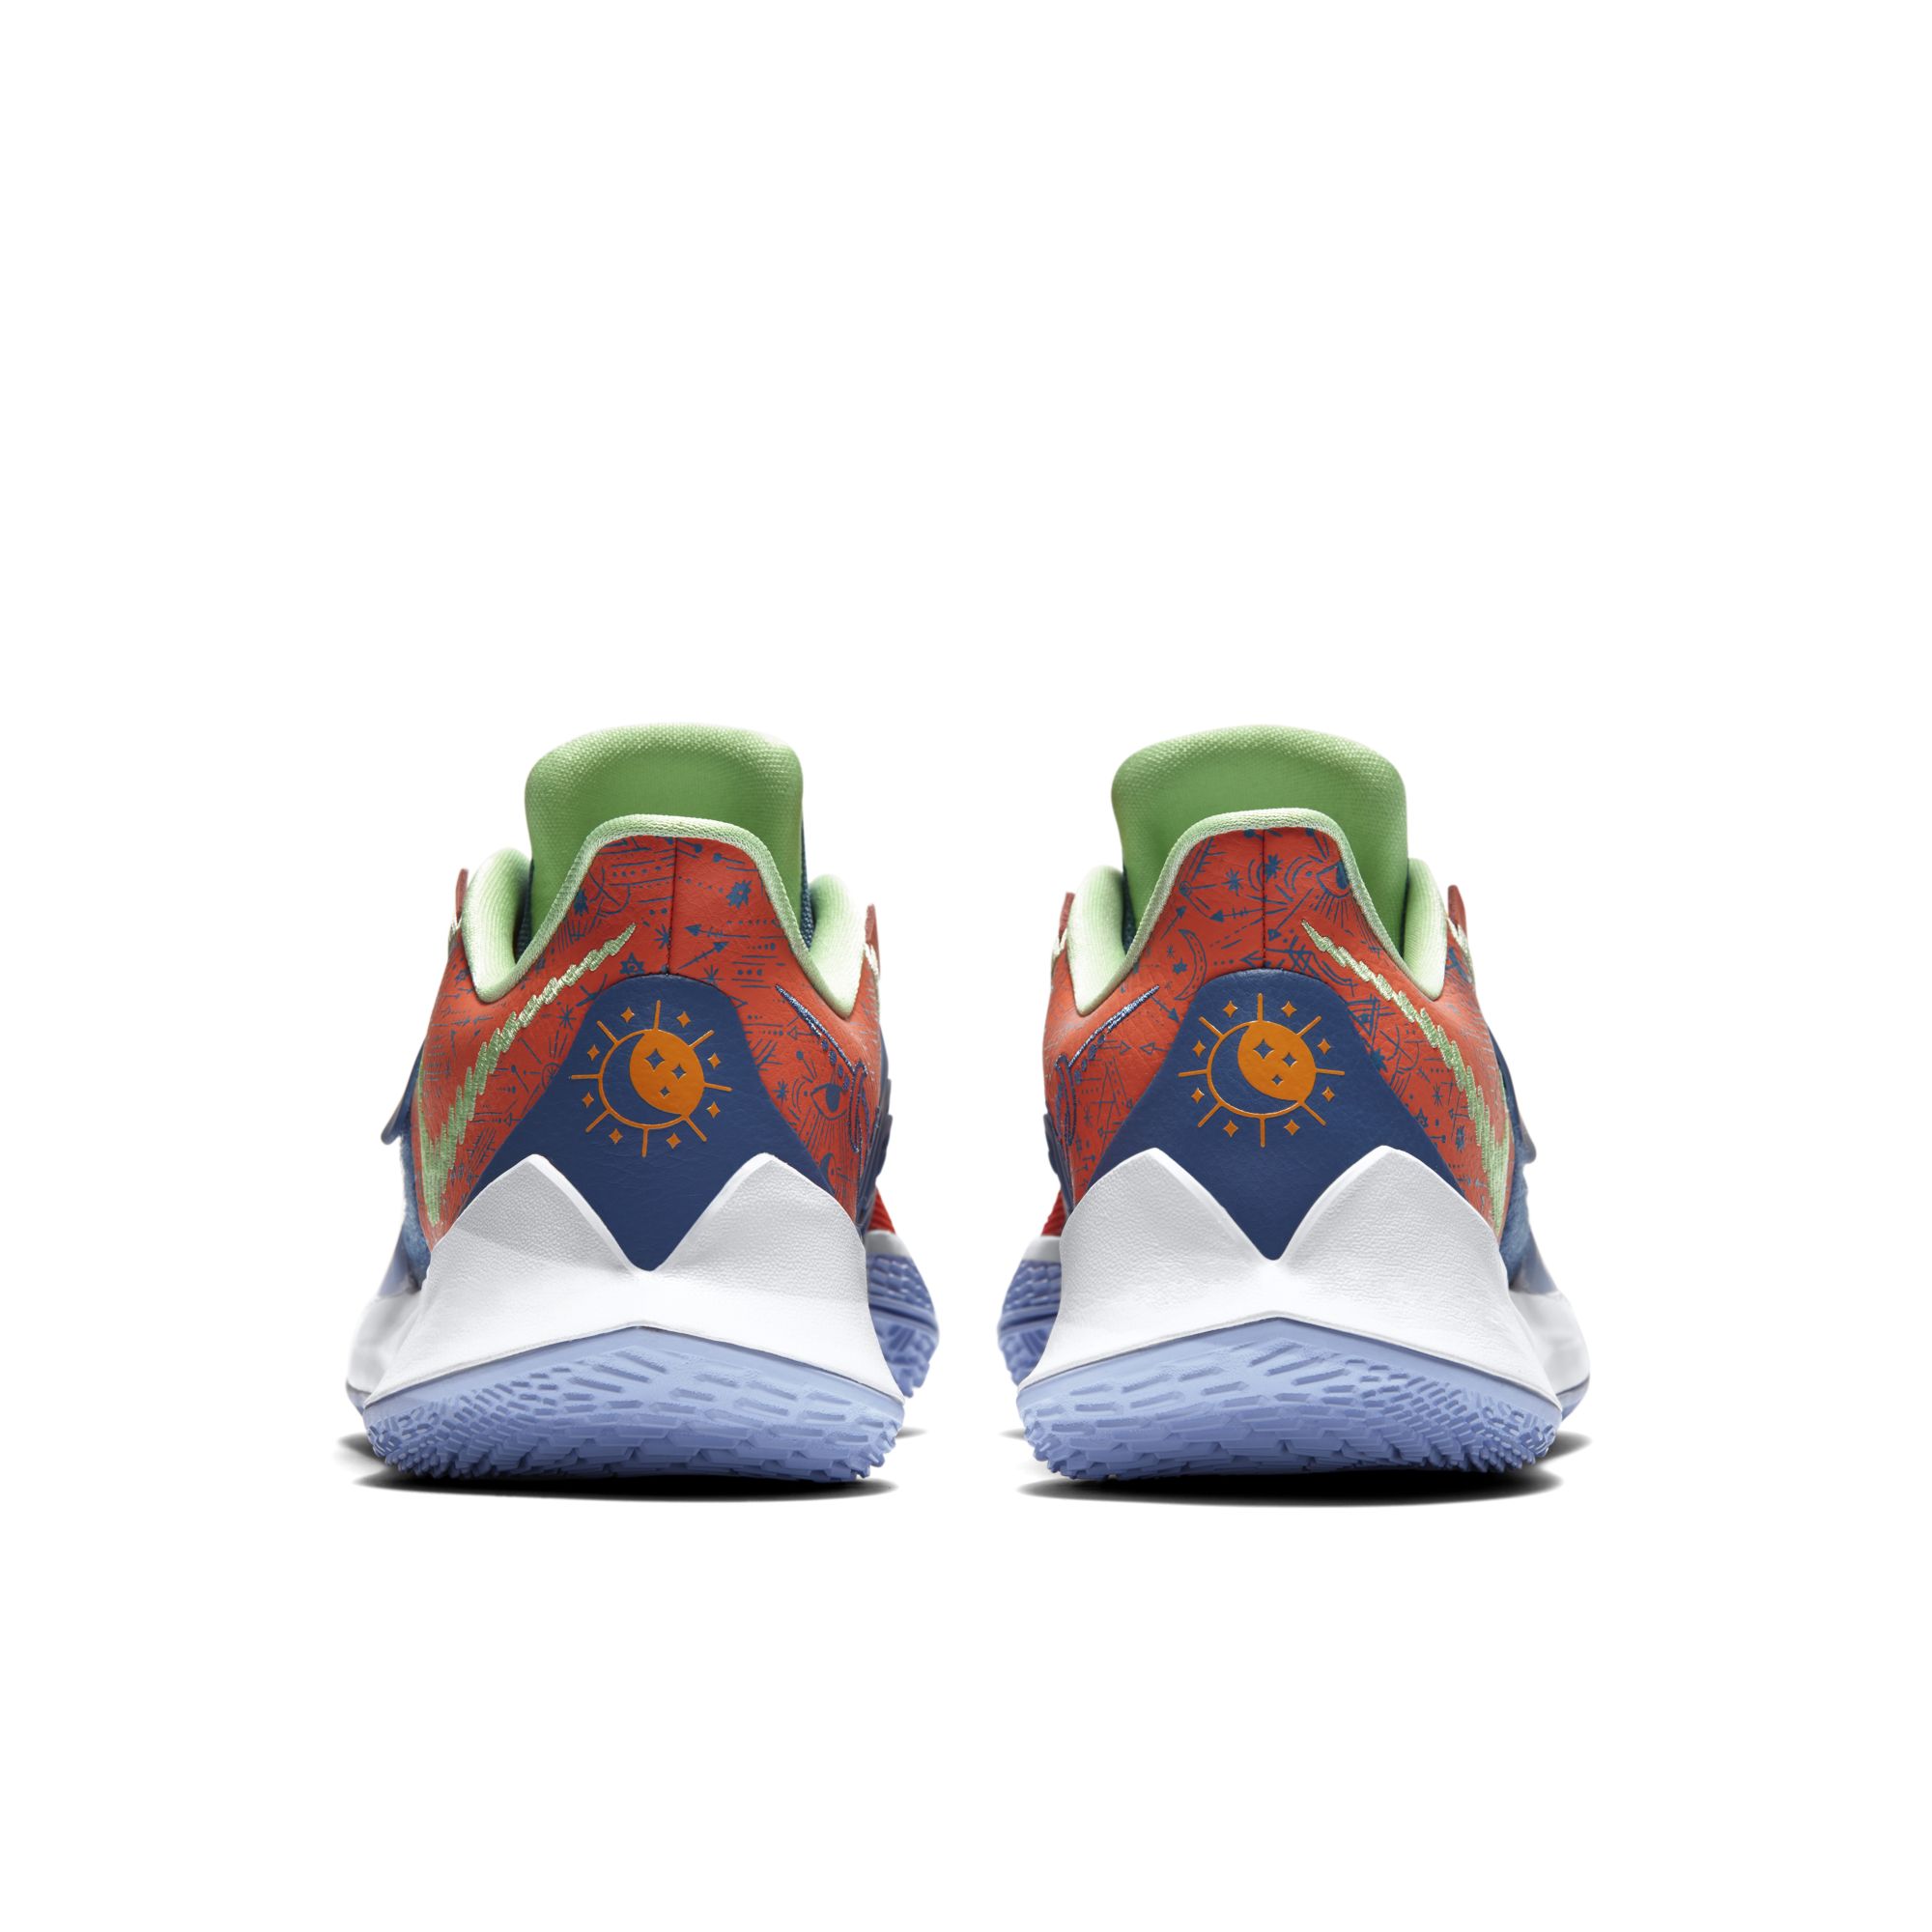 NEW KYRIE LOW 3 COLOURWAY – SNEAKER SPECULATION